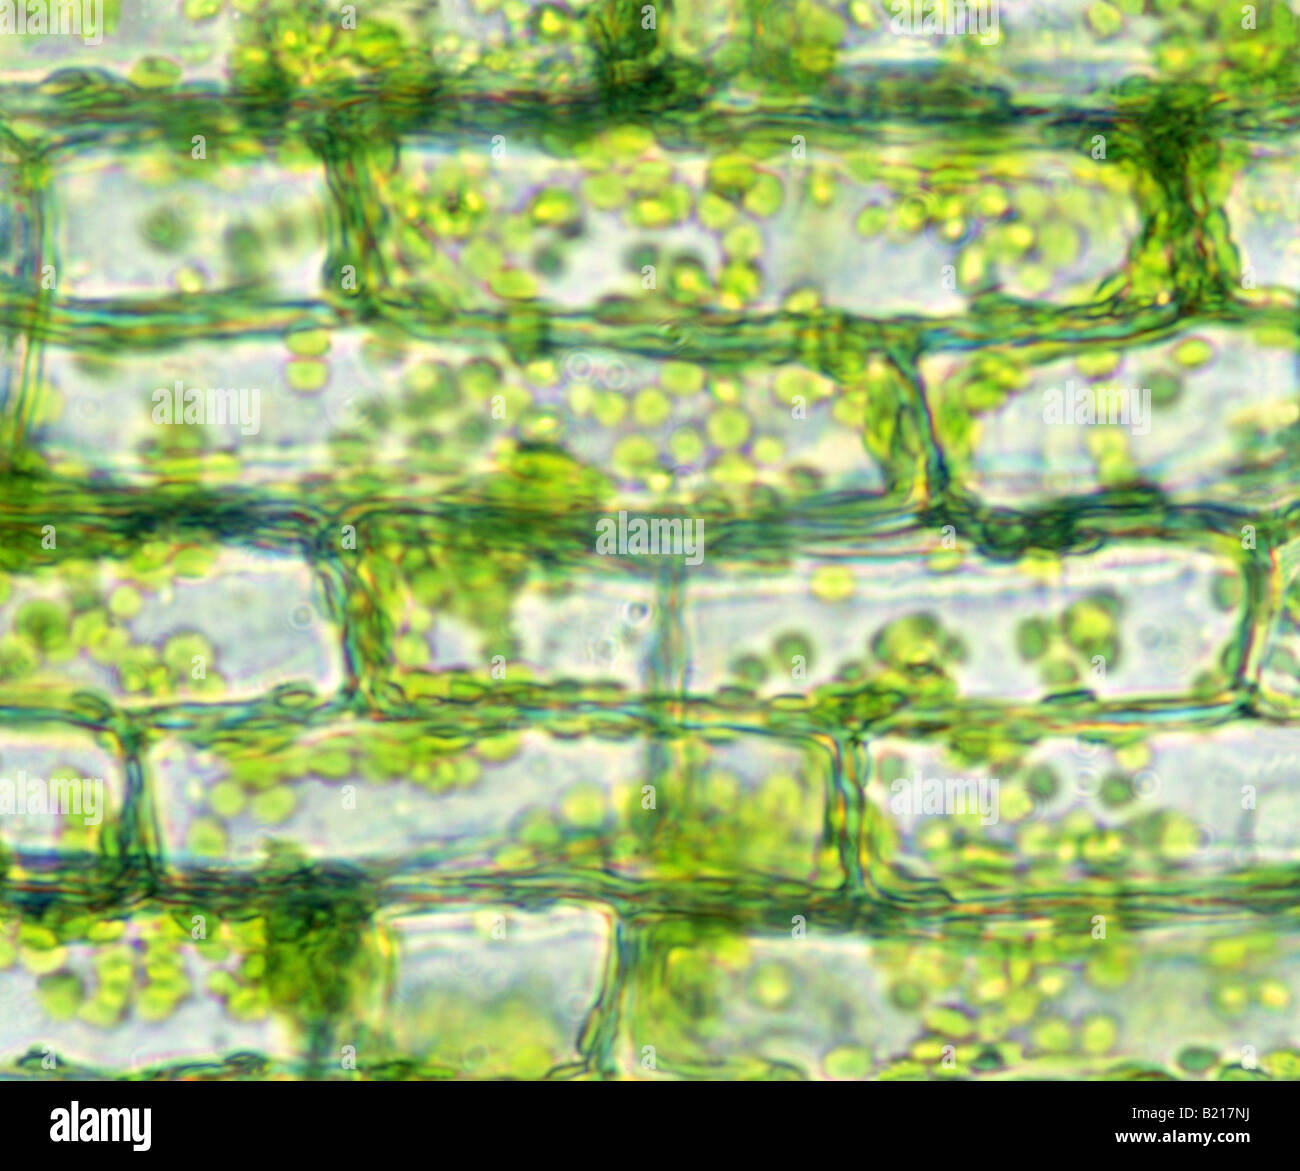 WATER WEED ELODEA LEAF CELLS ANACHRIS SP AQUATIC PERENNIAL PLANT SHOWING CELL WALL CHLOROPLASTS 200X STUDIO Stock Photo